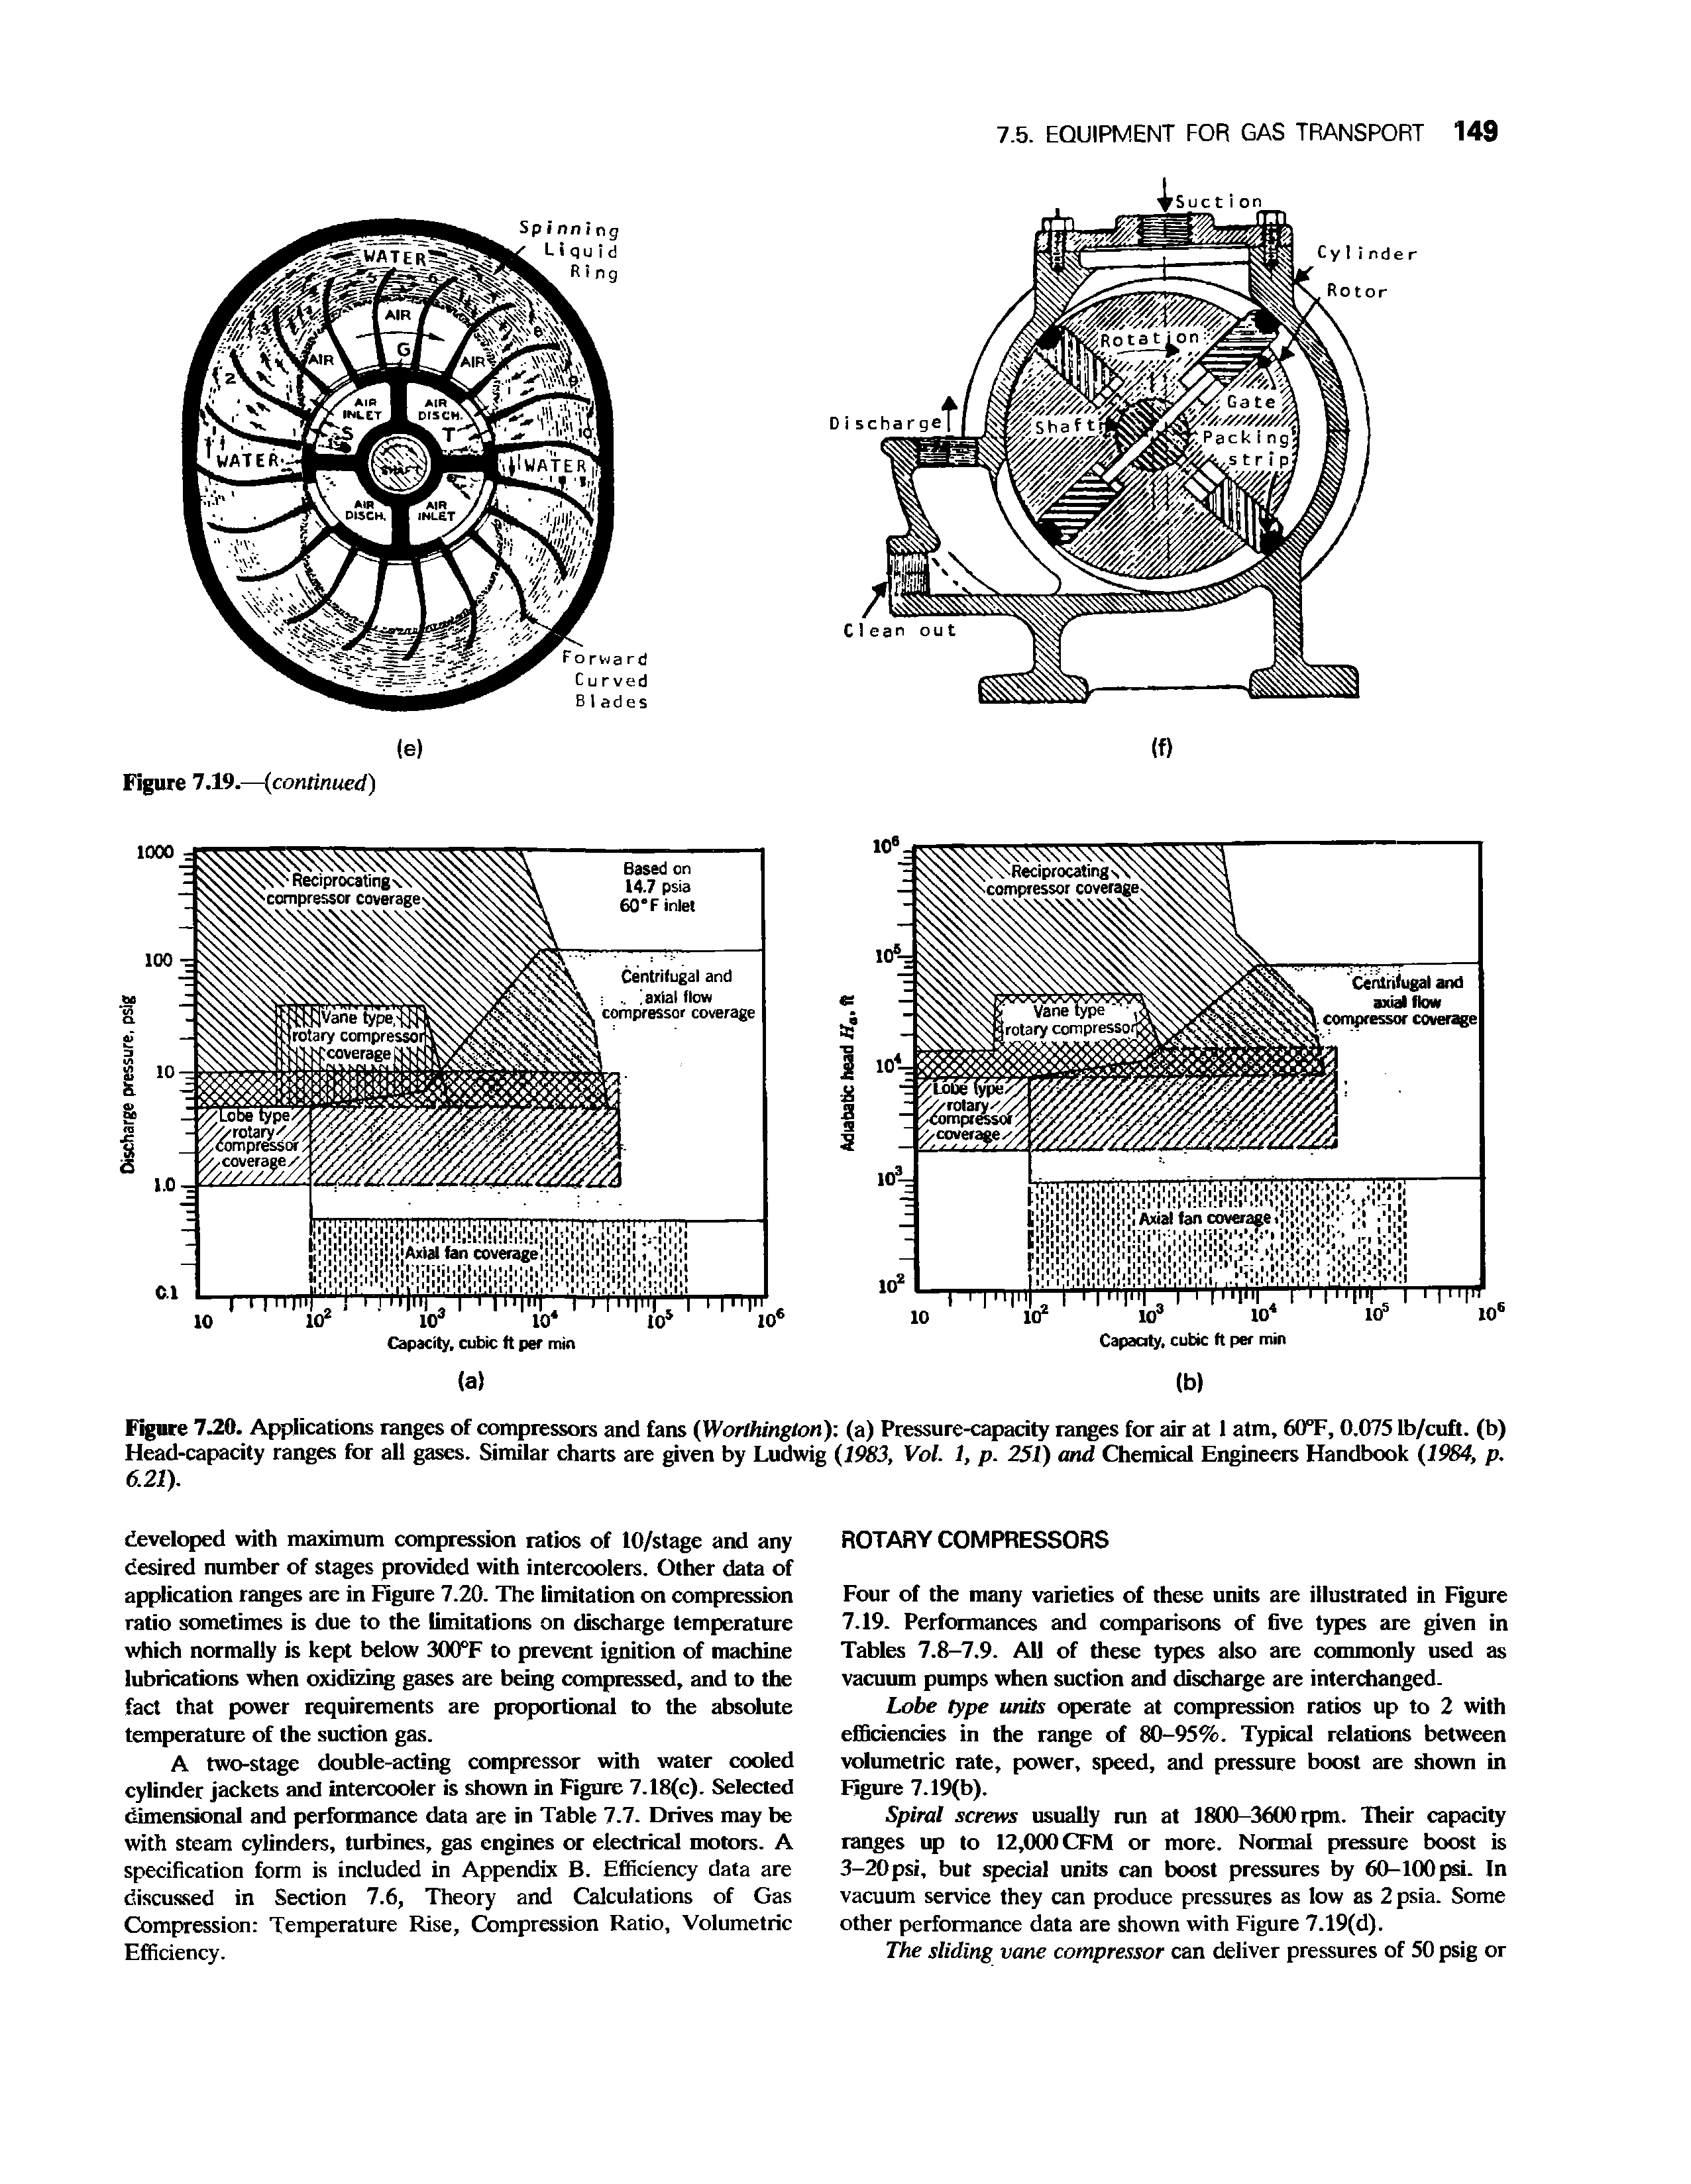 Figure 7.20. Applications ranges of compressors and fans (Worthington) (a) Pressure-capacity ranges for air at 1 atm, 60°F, 0.075 Lb/cuft. (b) Head-capacity ranges for all gases. Similar charts are given by Ludwig (1983, Vol. 1, p. 251) and Chemical Engineers Handbook (1984, p. 6.21).